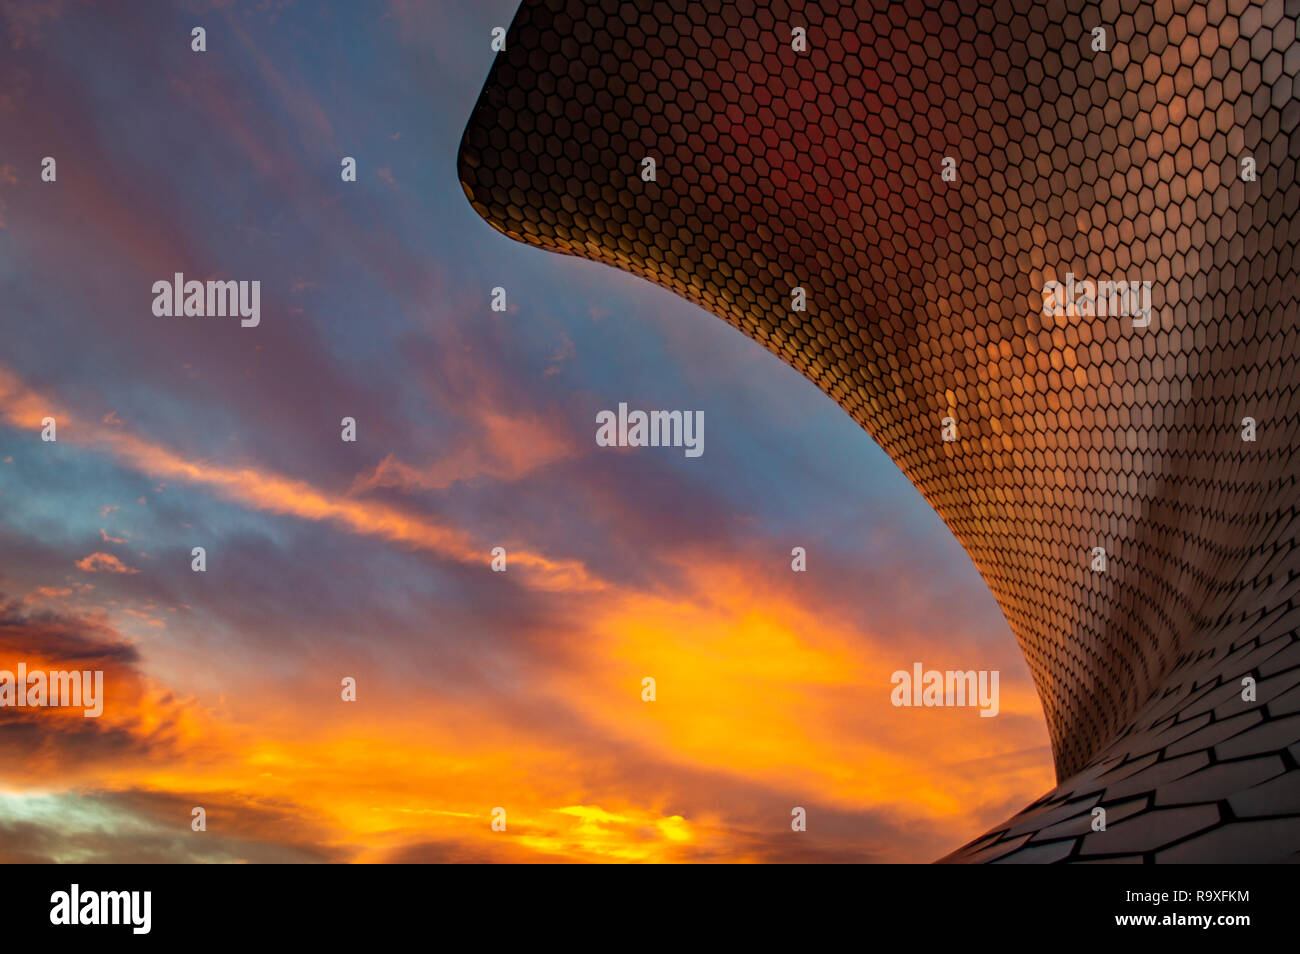 A sunset reflected on Museo Soumaya in Mexico City, Mexico Stock Photo